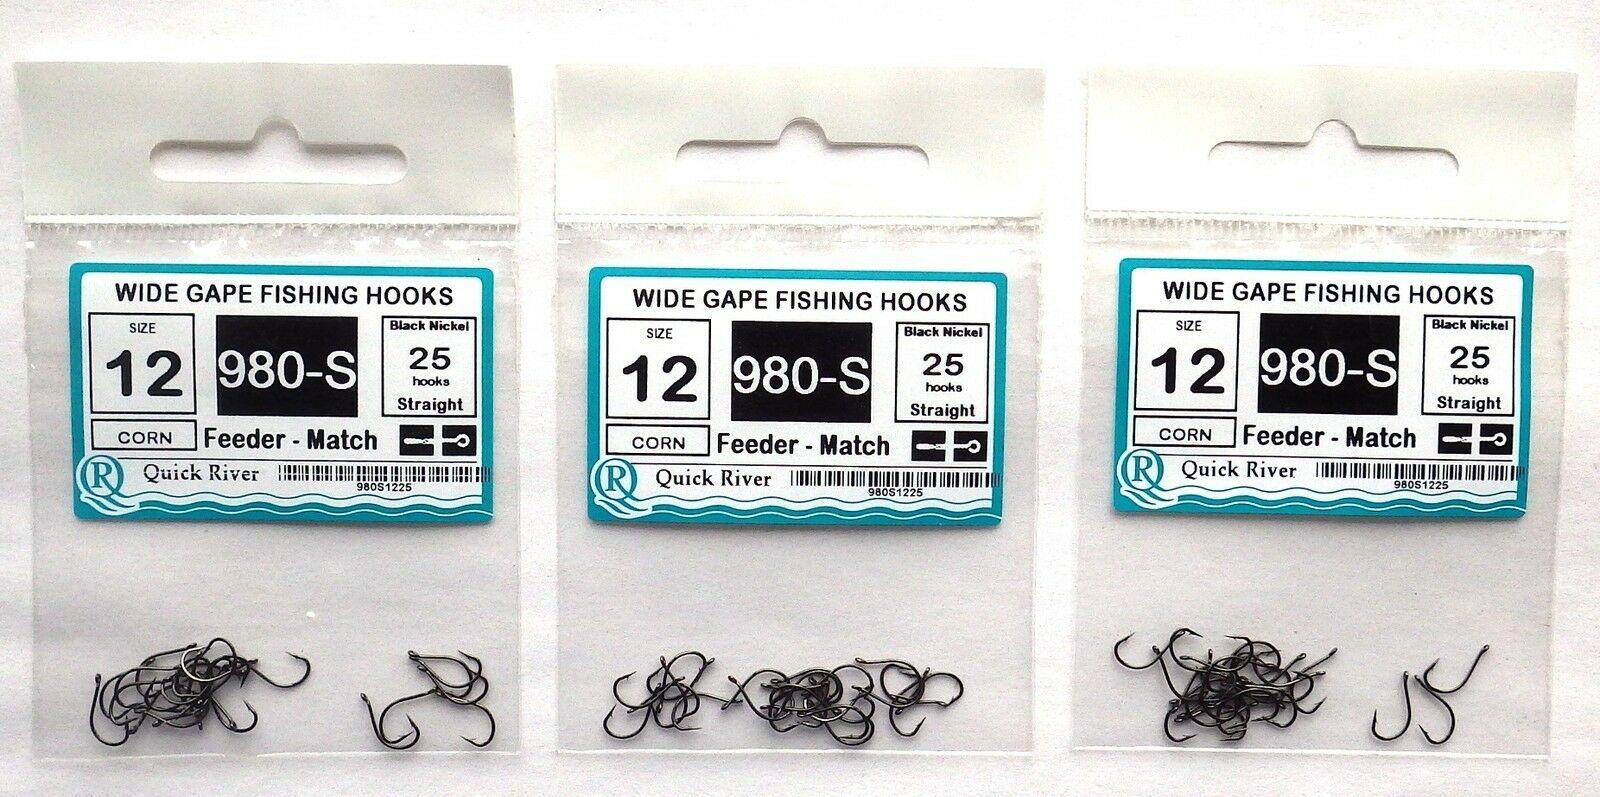 FEEDER MATCH 50 small FISHING HOOKS Size #20 18 № 980-S Black Nickel for corn 